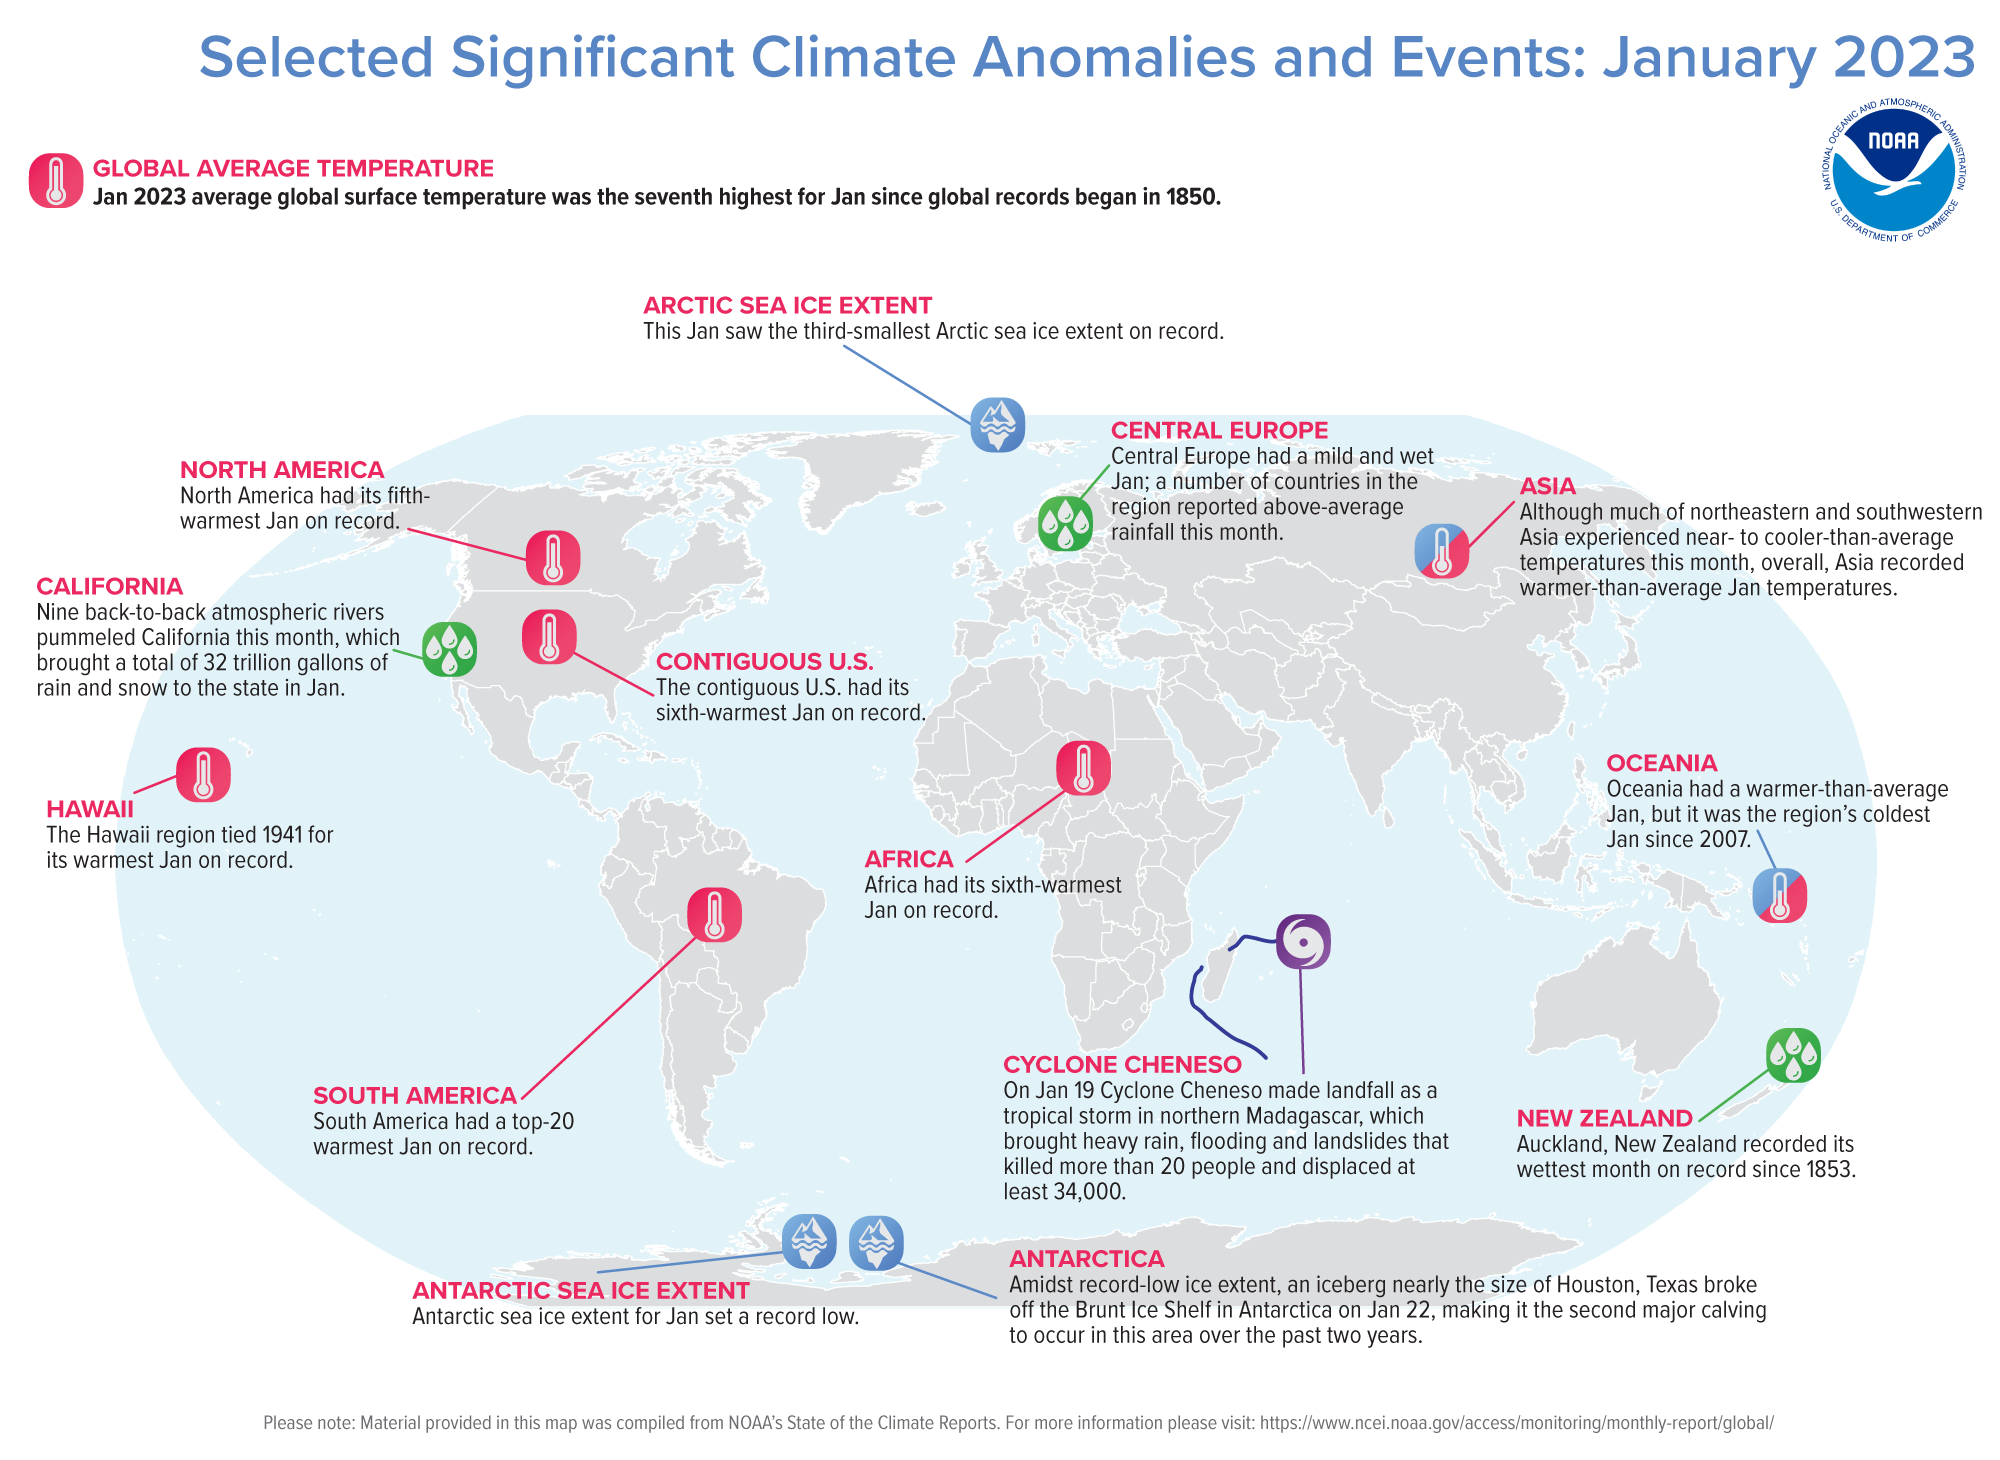 A map of the world plotted with some of the most significant climate events that occurred during January 2023.